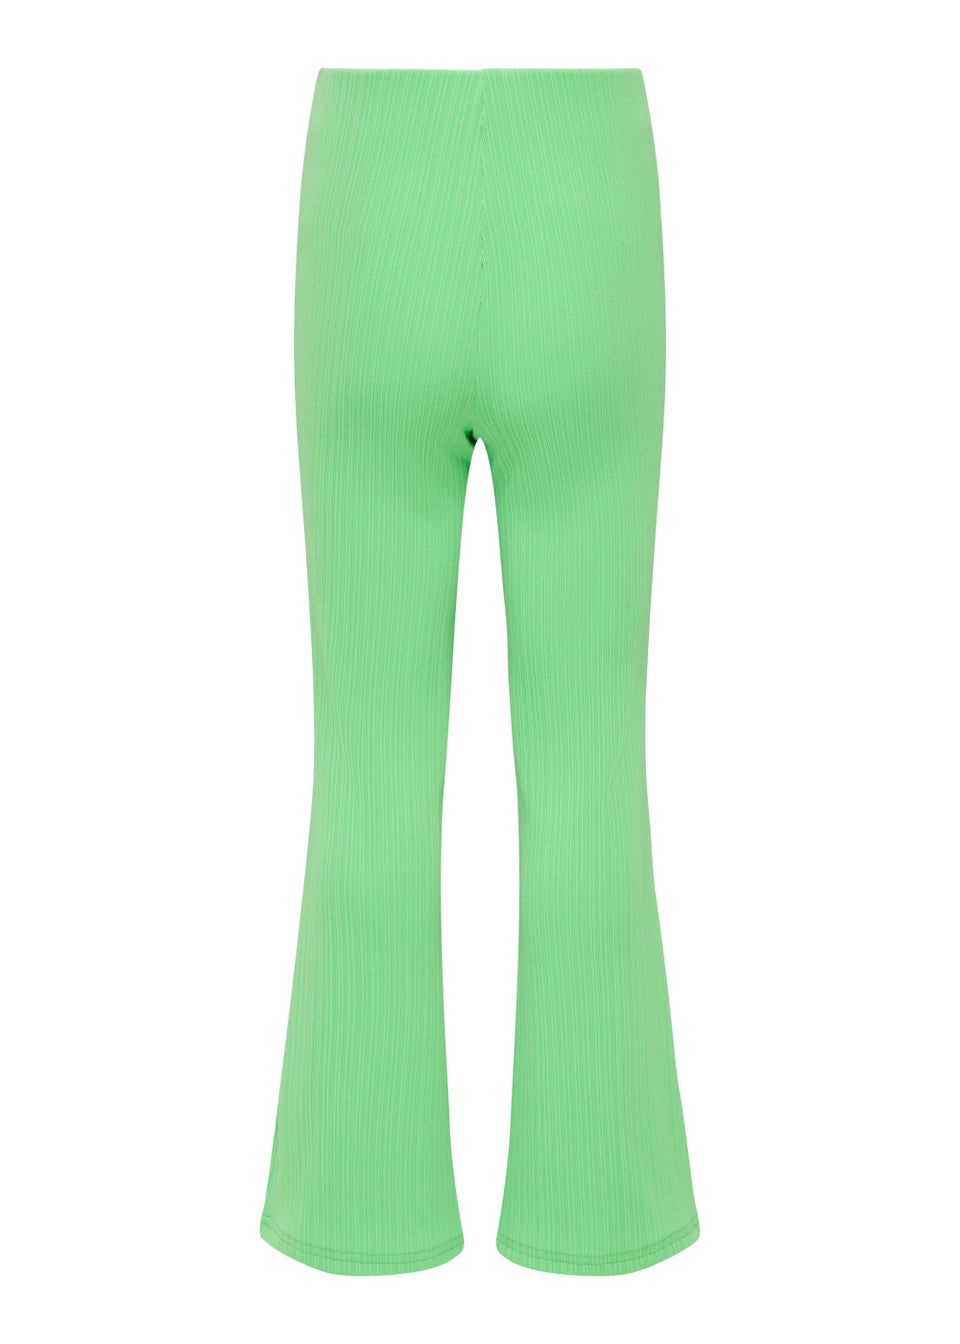 ONLY Kids Green Split Flared Trousers (6-14yrs)